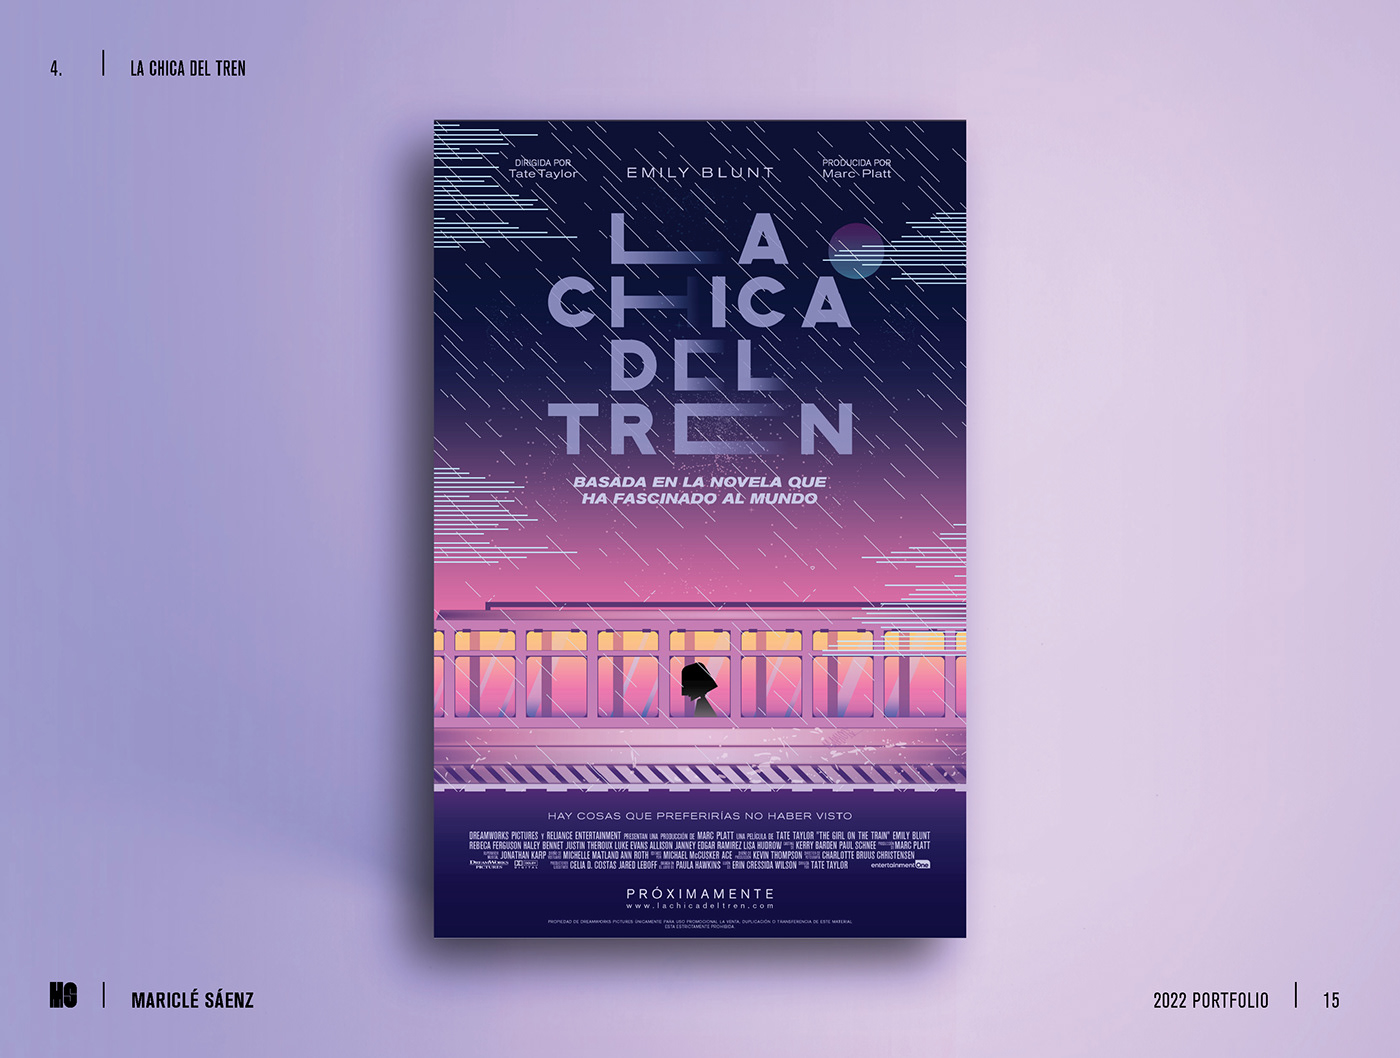 Poster design and a digital illustration of a girl in a train
